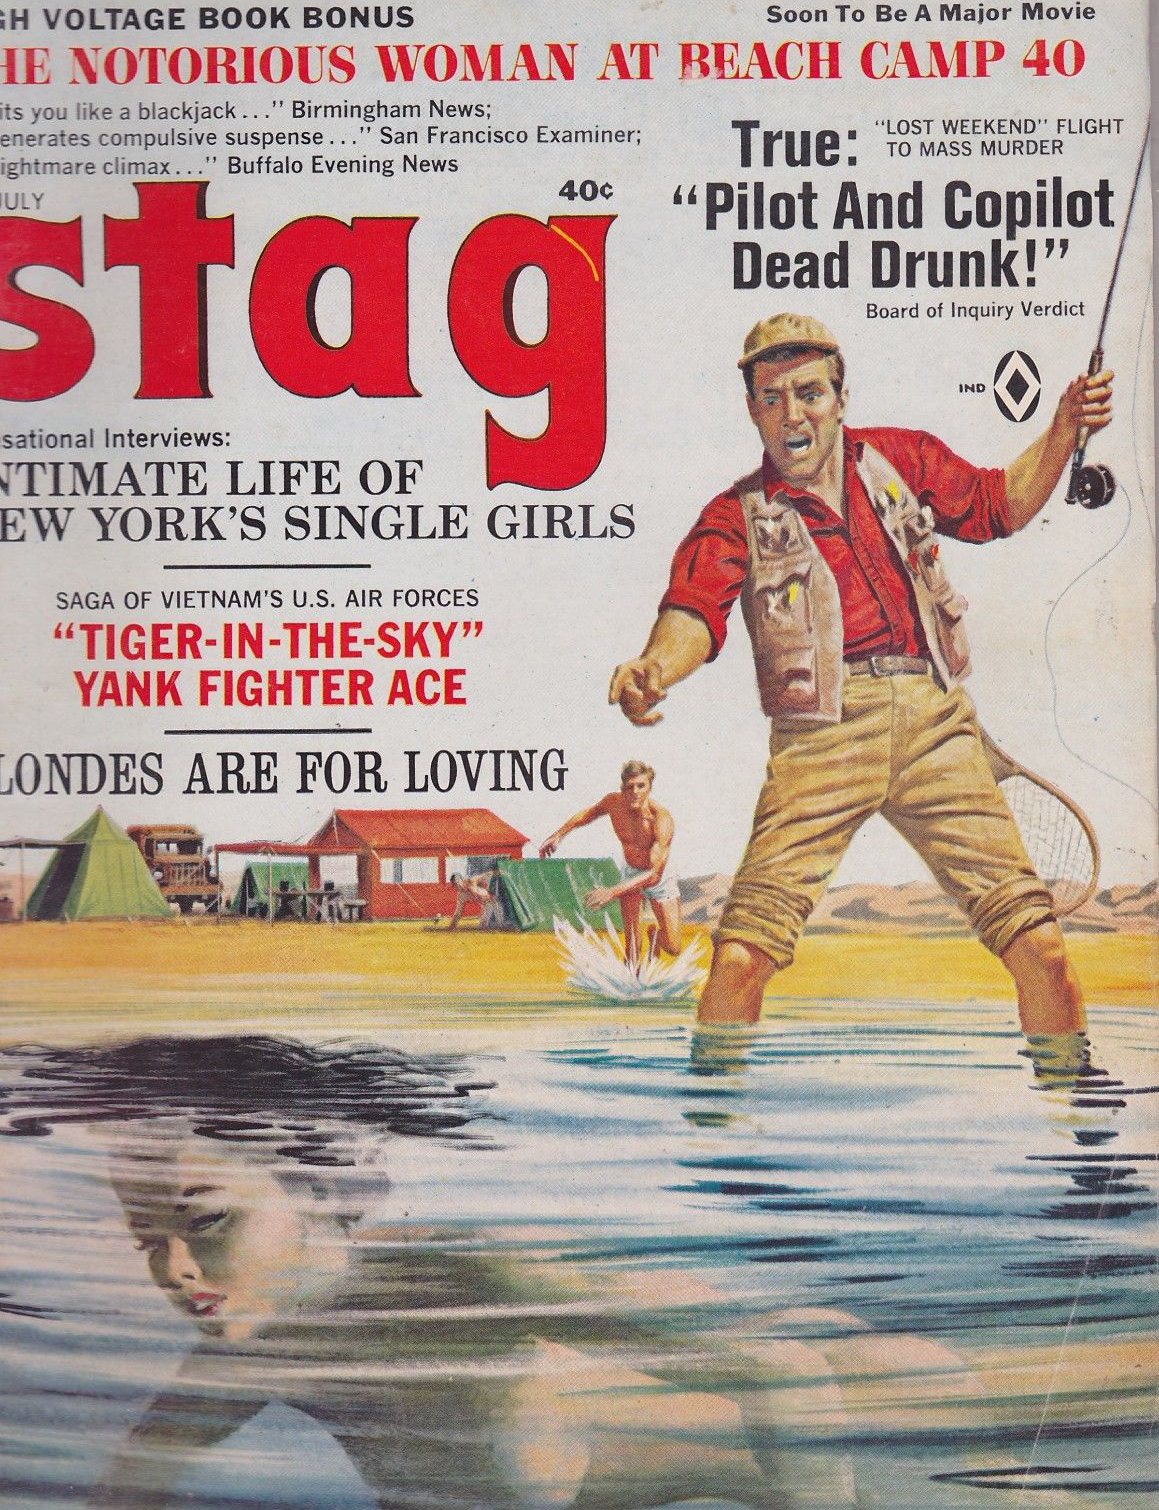 Stag July 1967 magazine back issue Stag magizine back copy Stag July 1967 Magazine for Men Adult Back Issue Published by Leeds Publishing Corp. The Notorious Woman At Beach Camp 40.